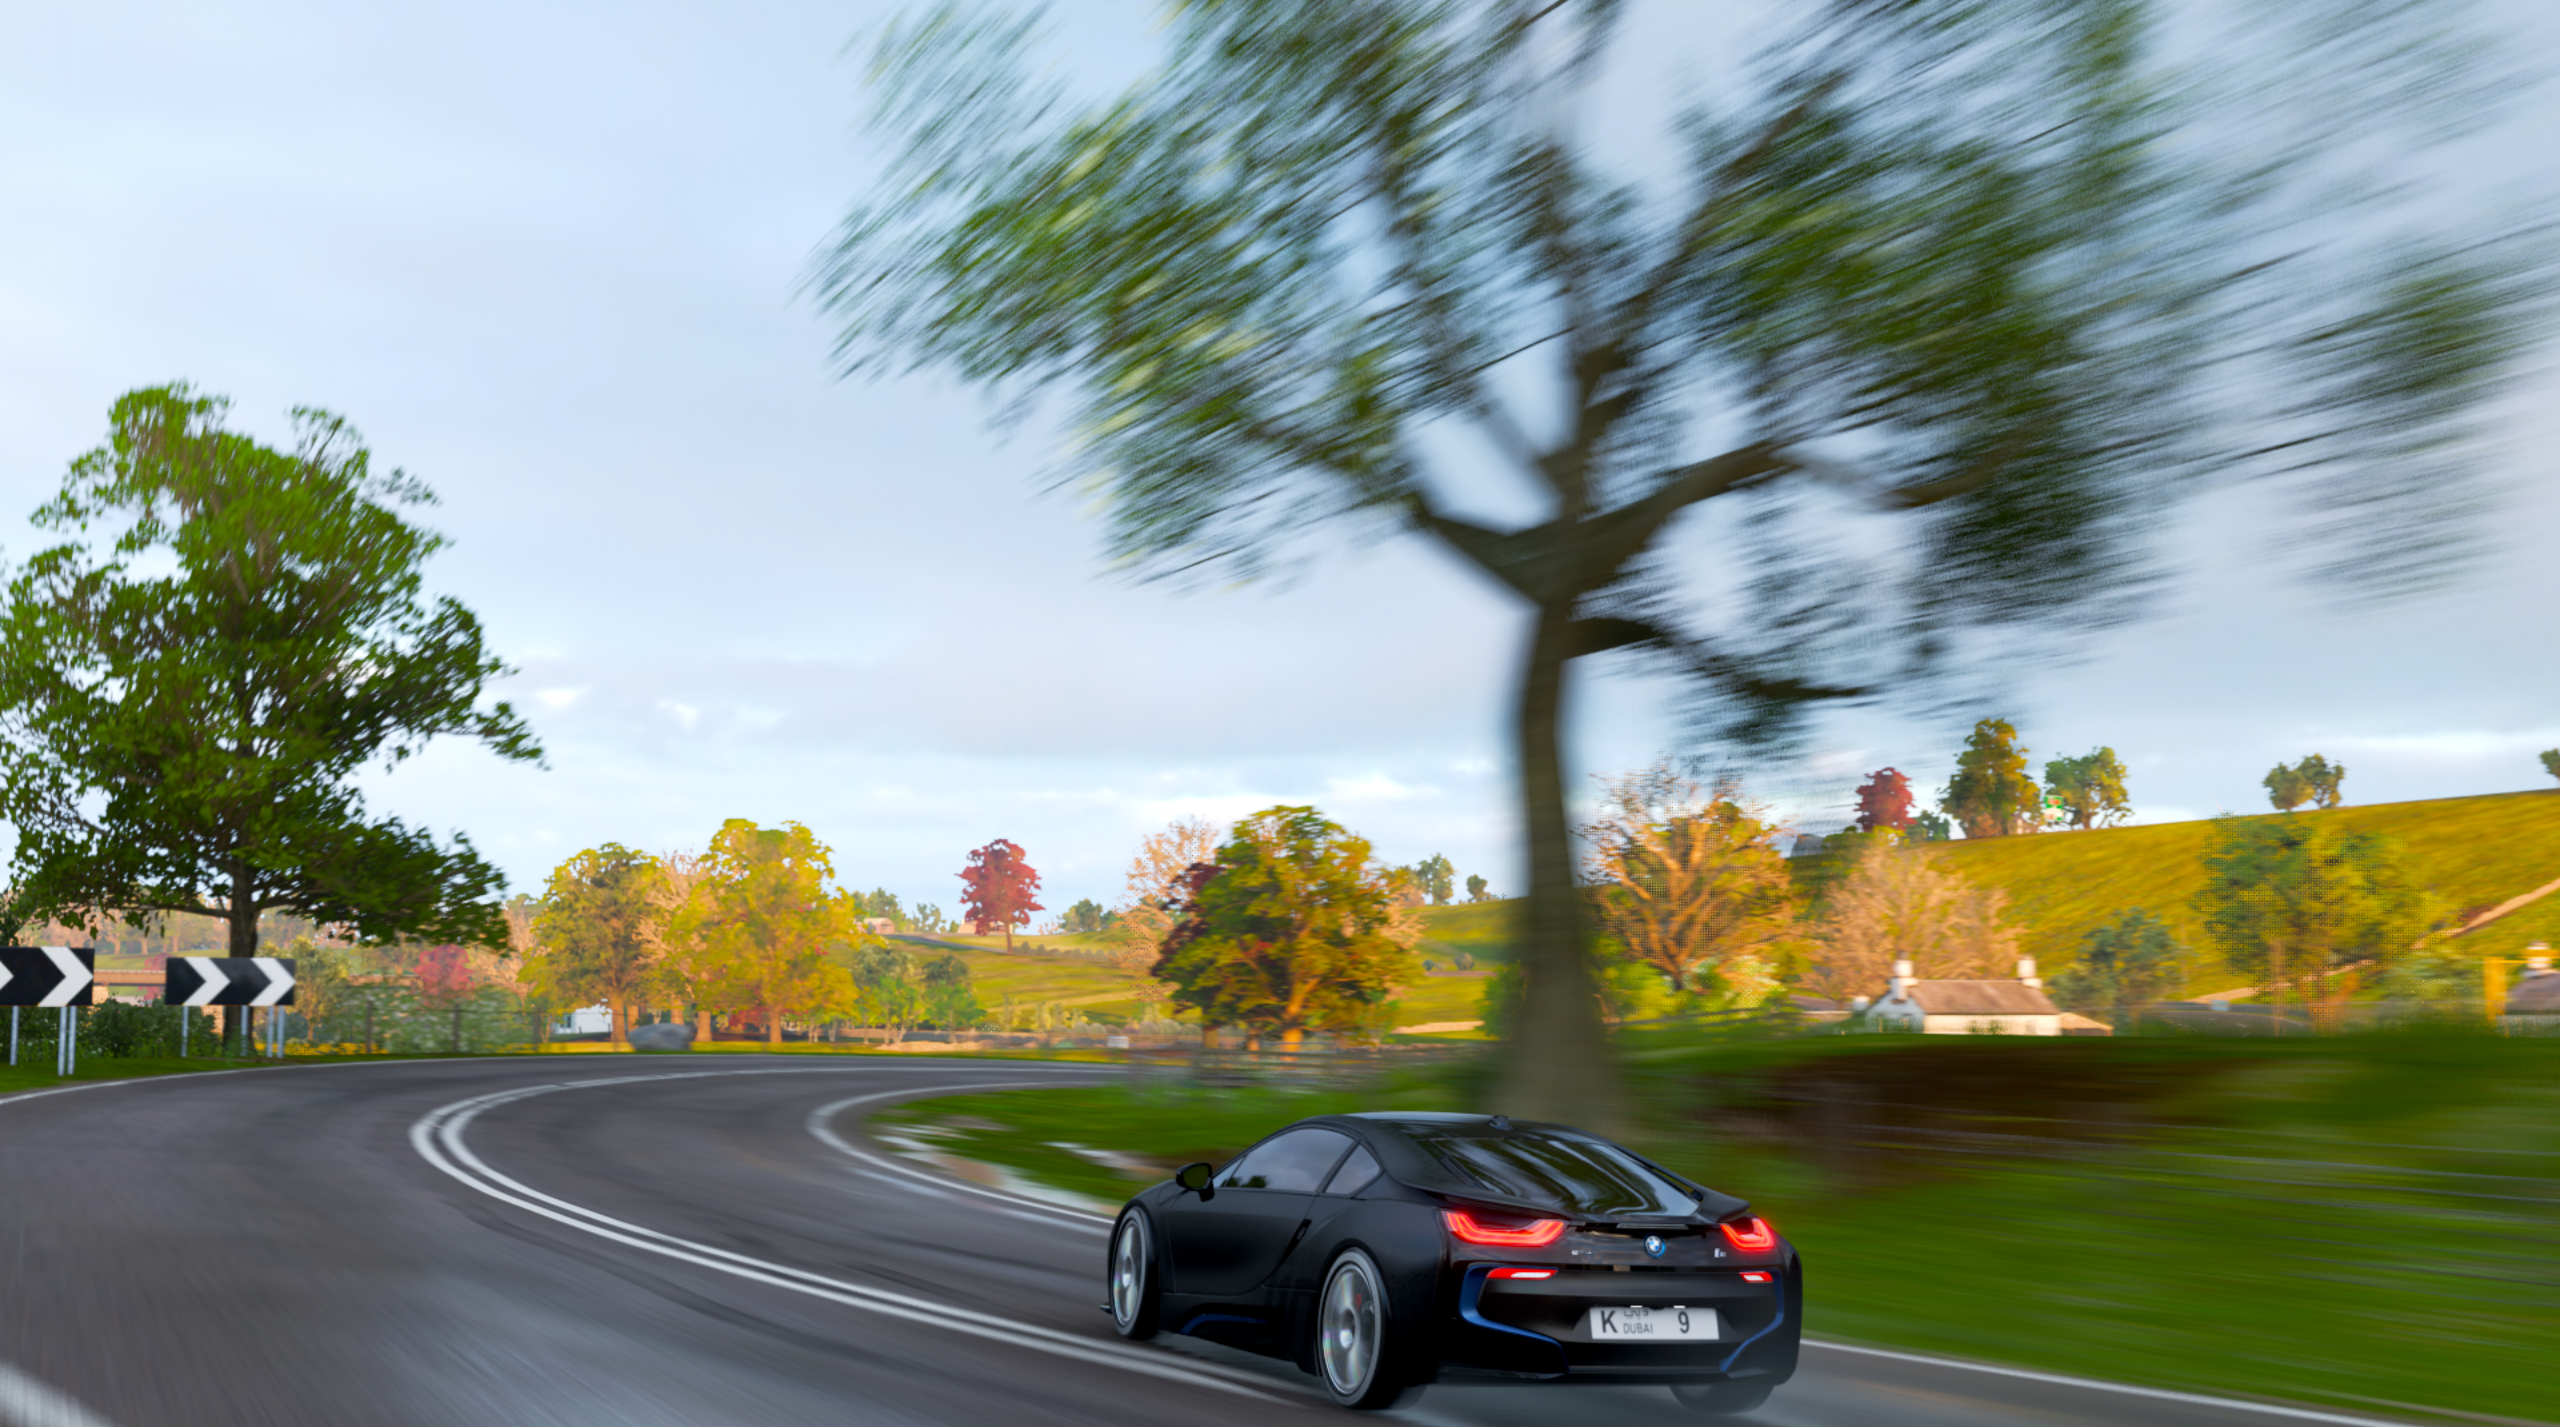 Horizon Line Art Taillights Depth Of Field Car Motion Blur Rear View Trees Clouds Sky Driving 2560x1427